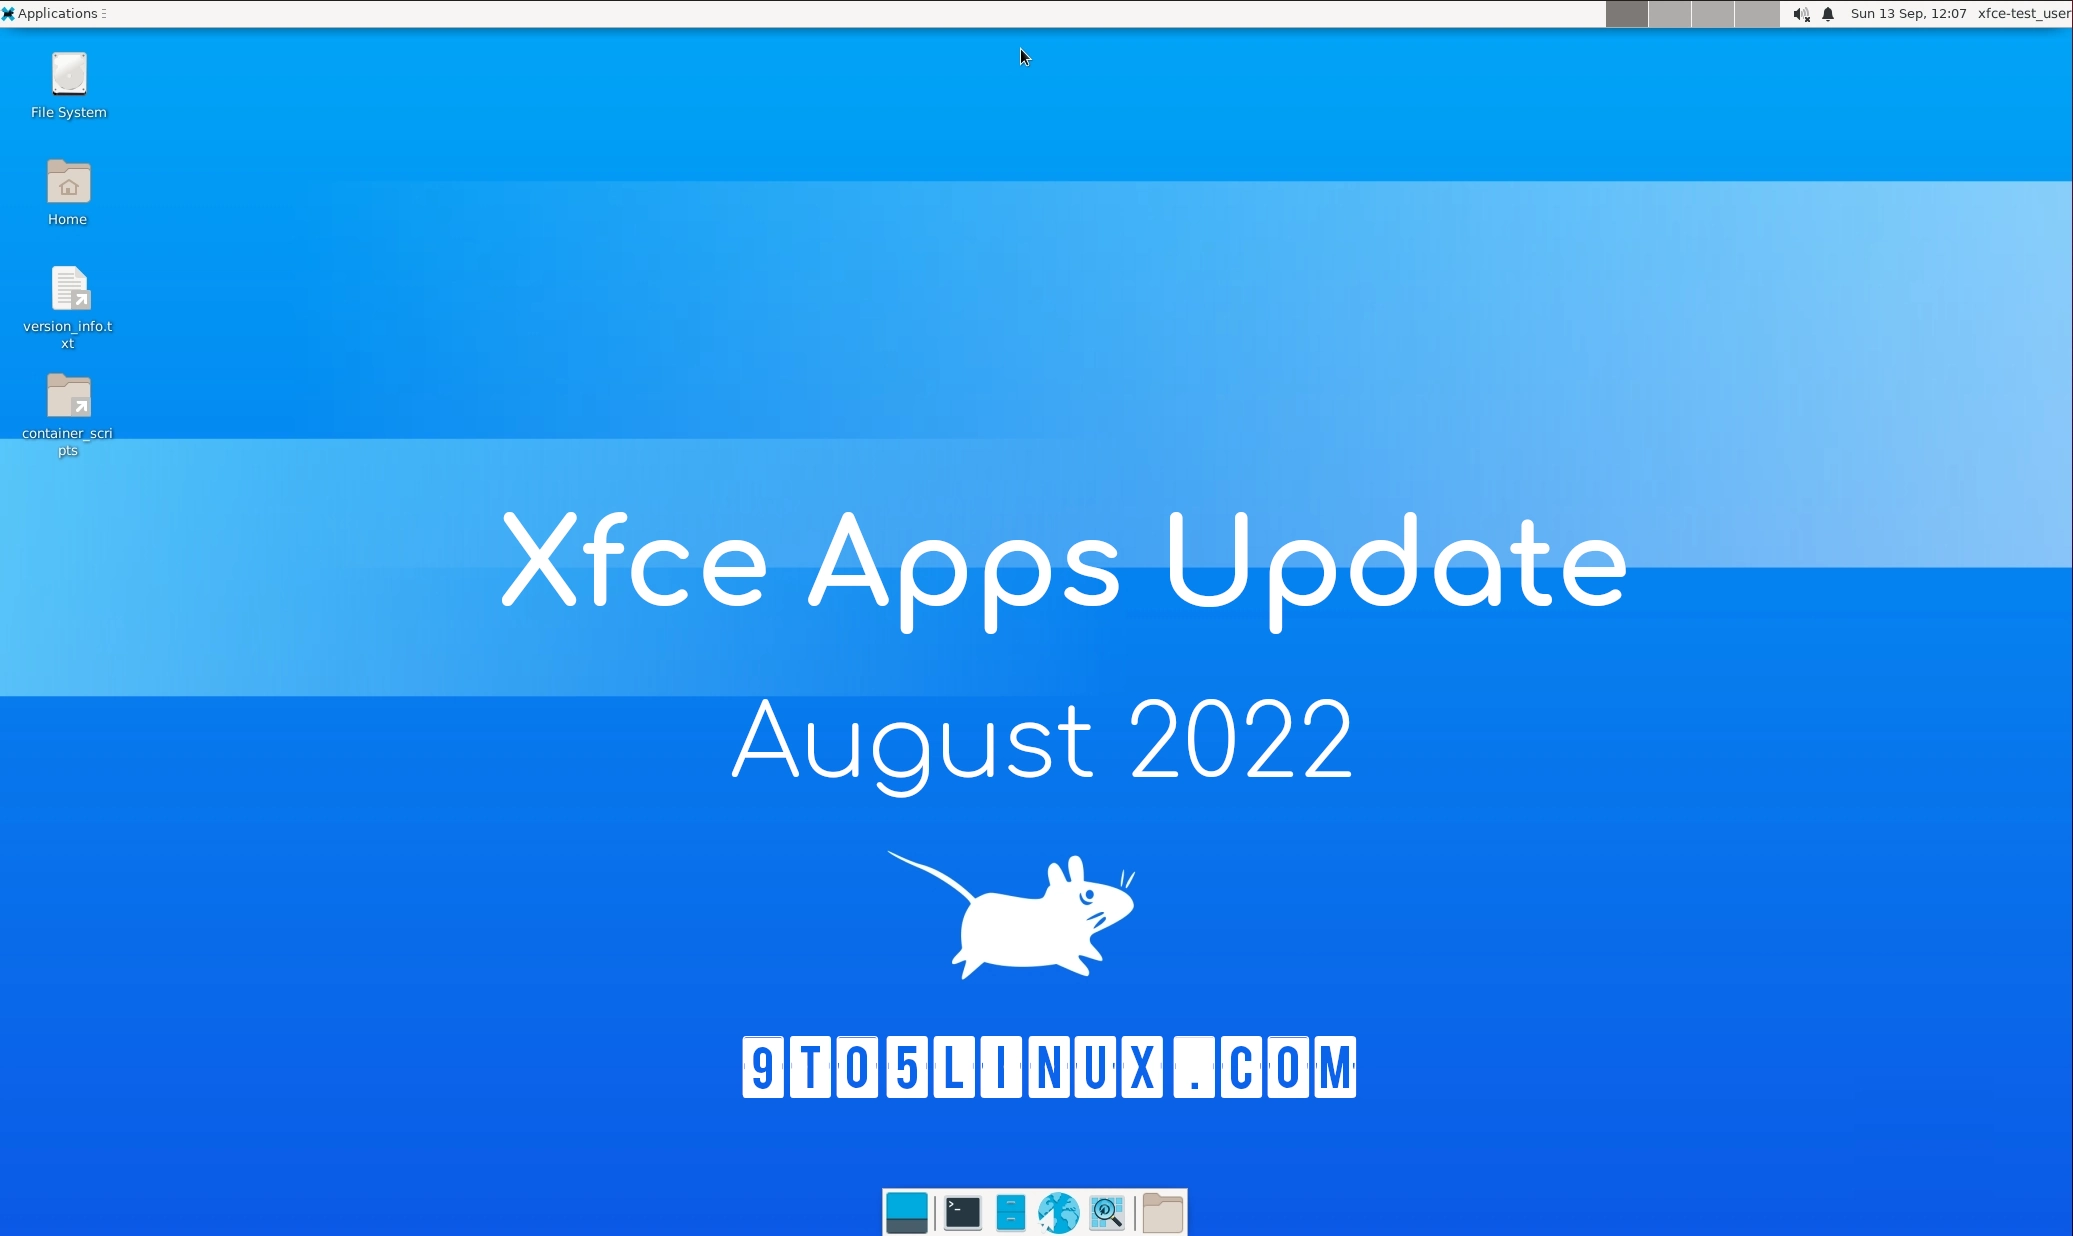 Xfce’s Apps Update for August 2022: Xfdashboard 1.0, WebP Support in Screenshooter